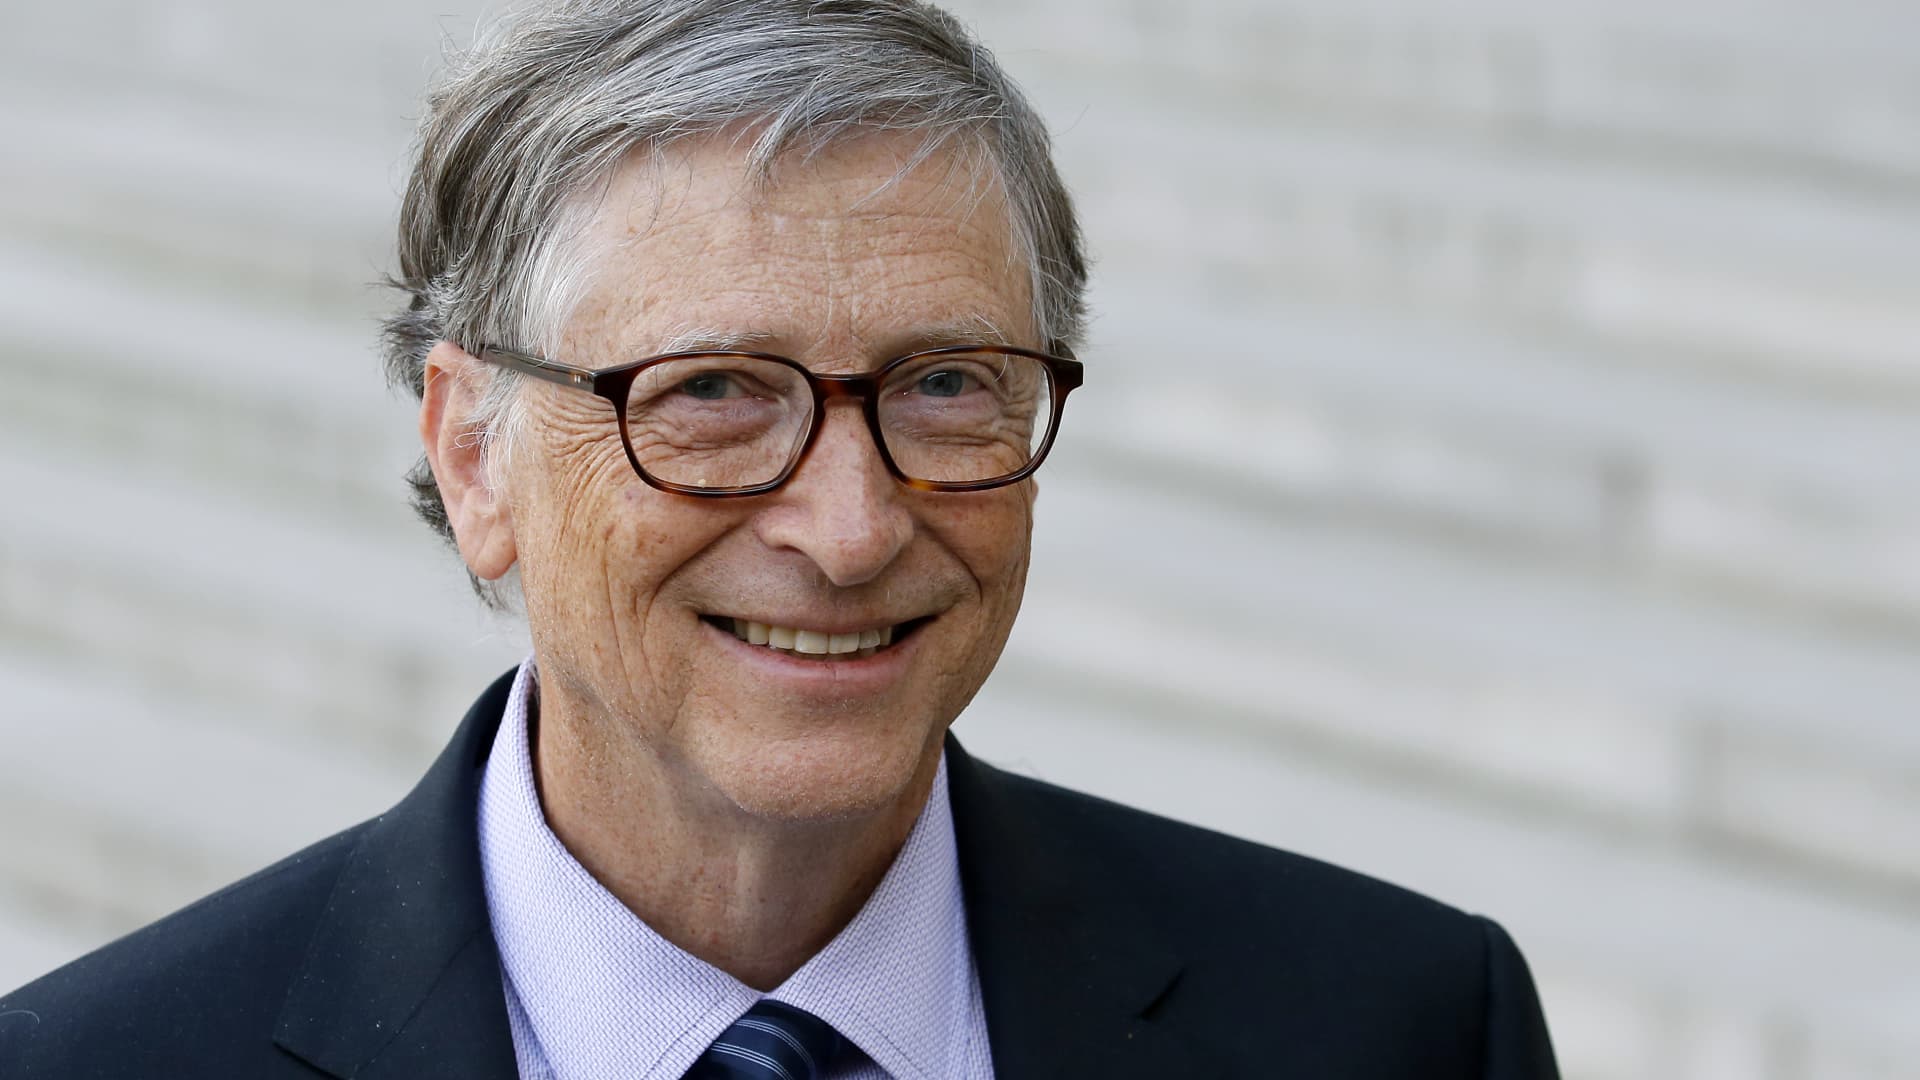 Bill Gates plans to give away 'virtually all' his $113 billion fortune